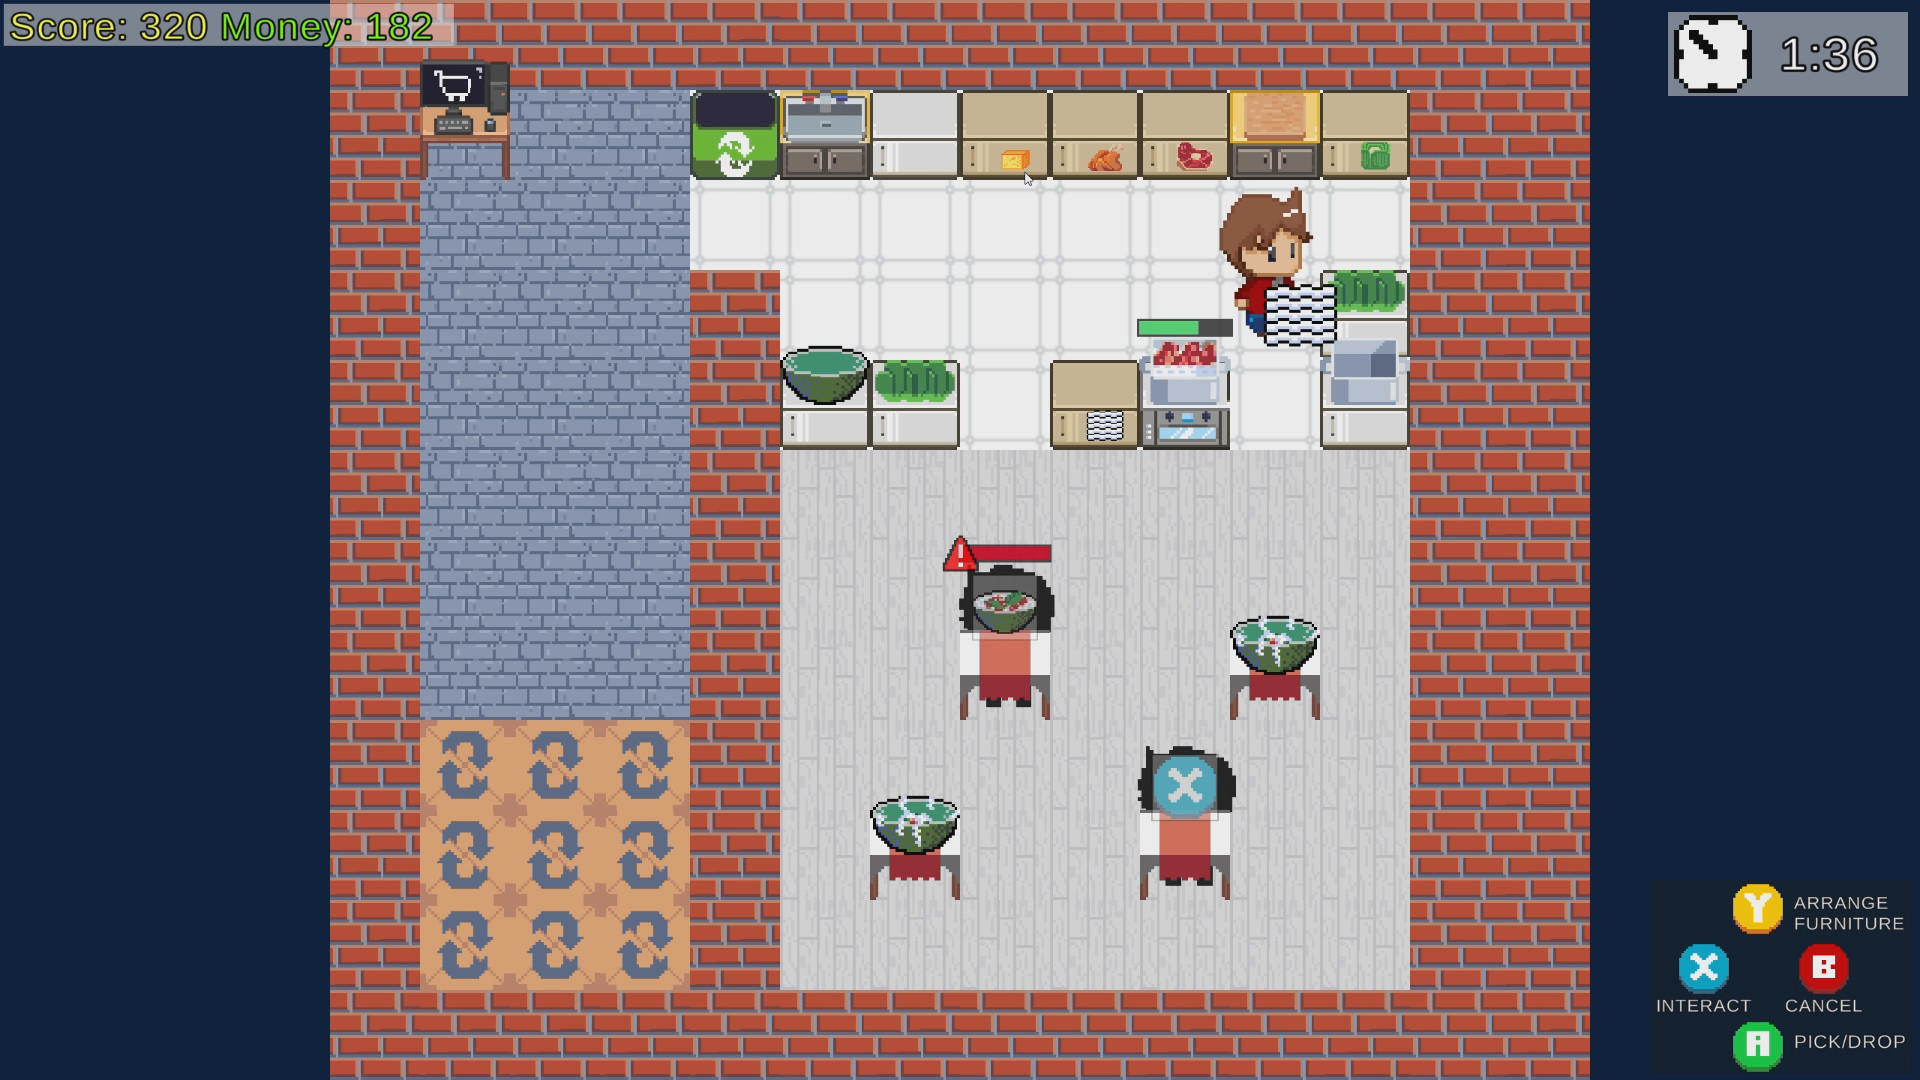 Screenshot 1 of What the Pho: Roguelike restaurant startup 